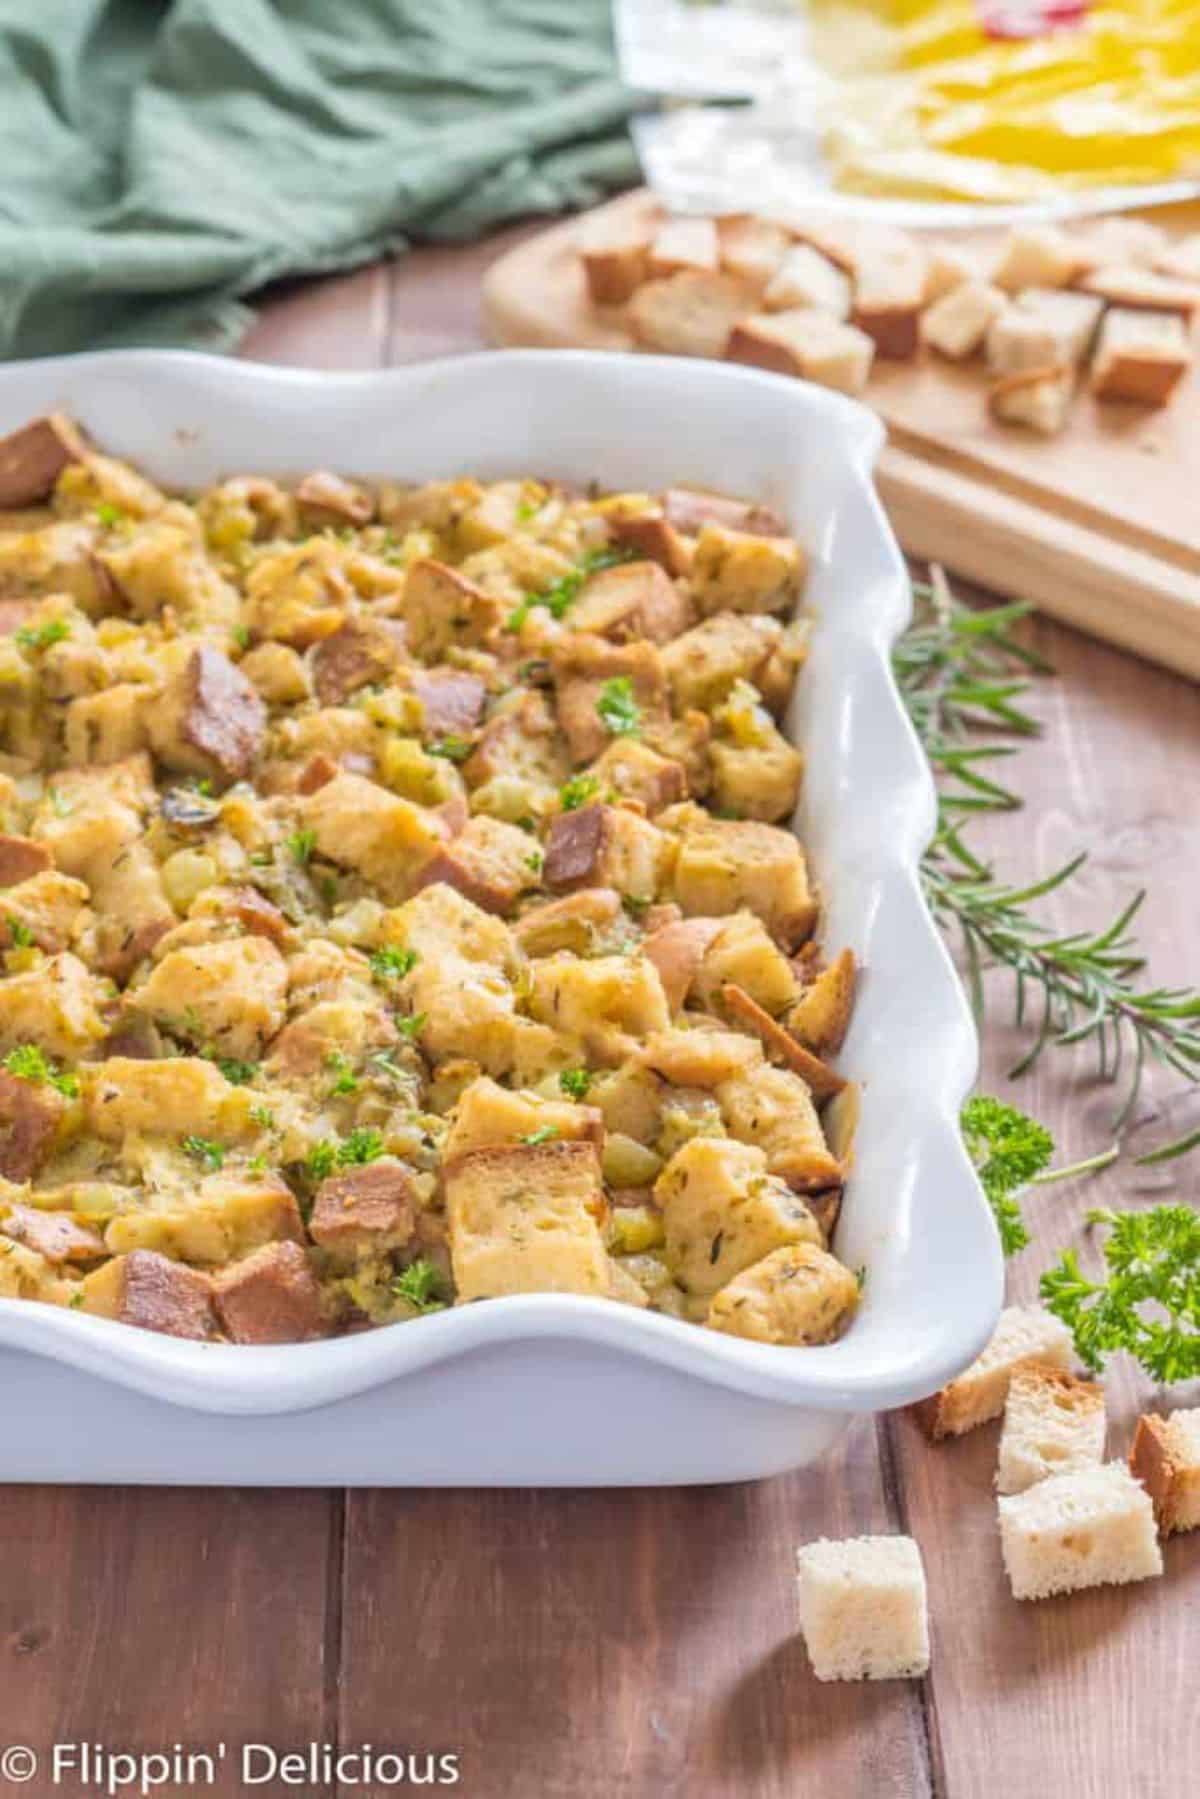 Scrumptious Gluten-Free Stuffing With Green Chile in a white casserole.